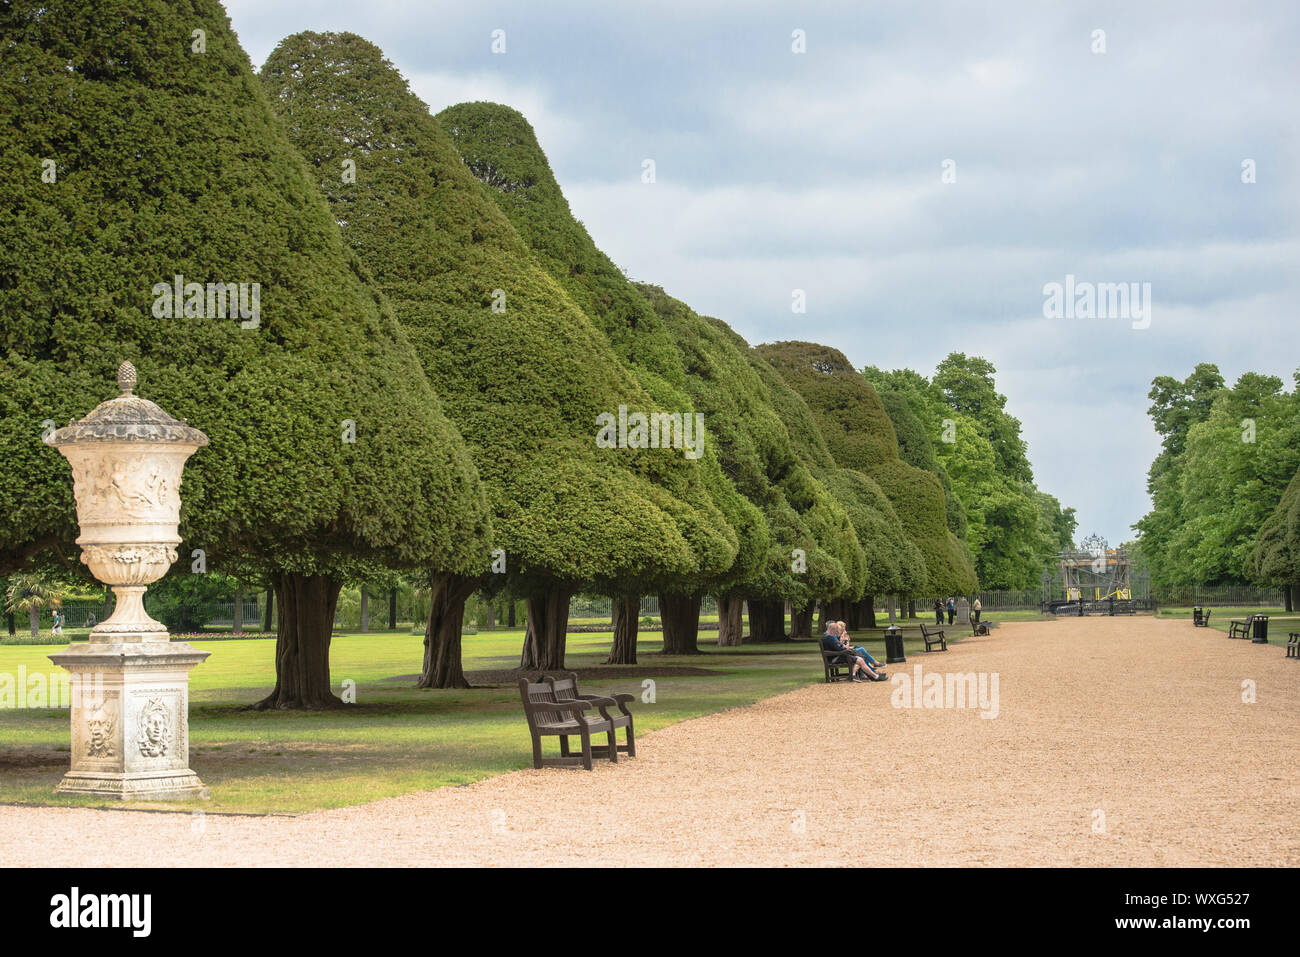 Mushroom shaped topiary Yew trees lining the wide avenue of the formal Great Fountain Garden of Hampton Court Palace. Royal palace near London, UK/ Stock Photo